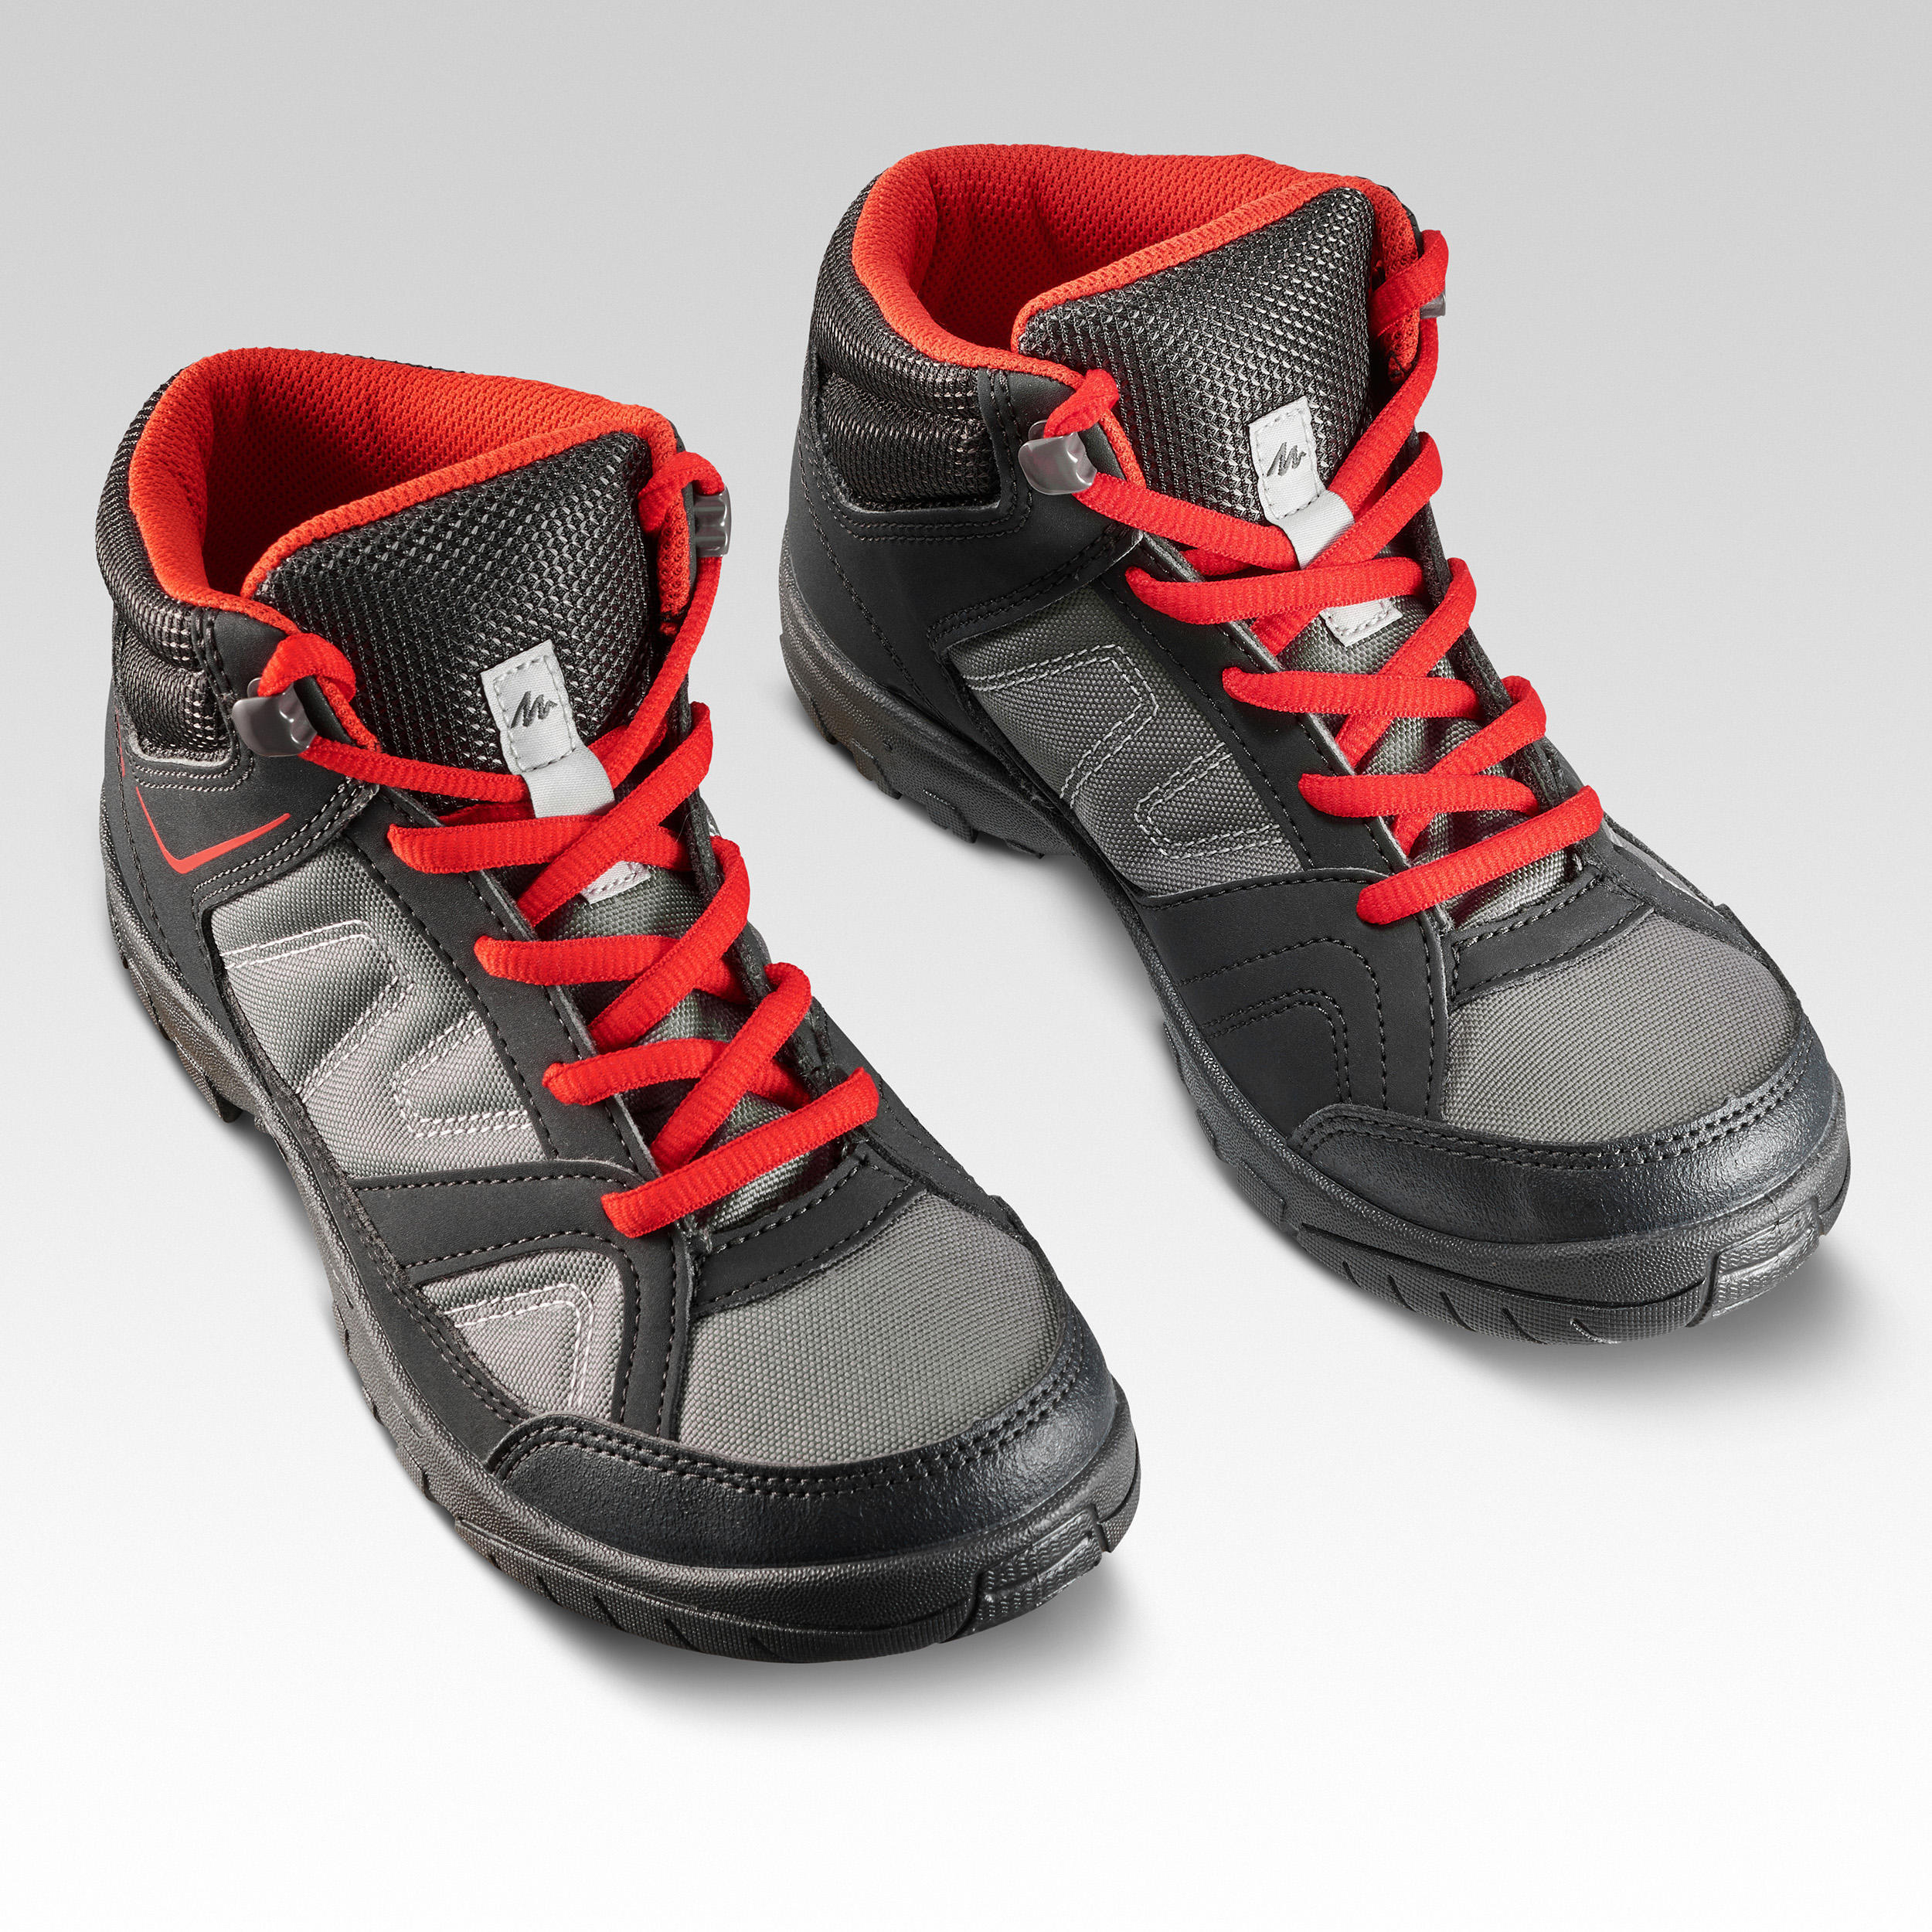 Kids Hiking Boots 35 TO 38 Mid JR MH100 - Black/Red 4/6